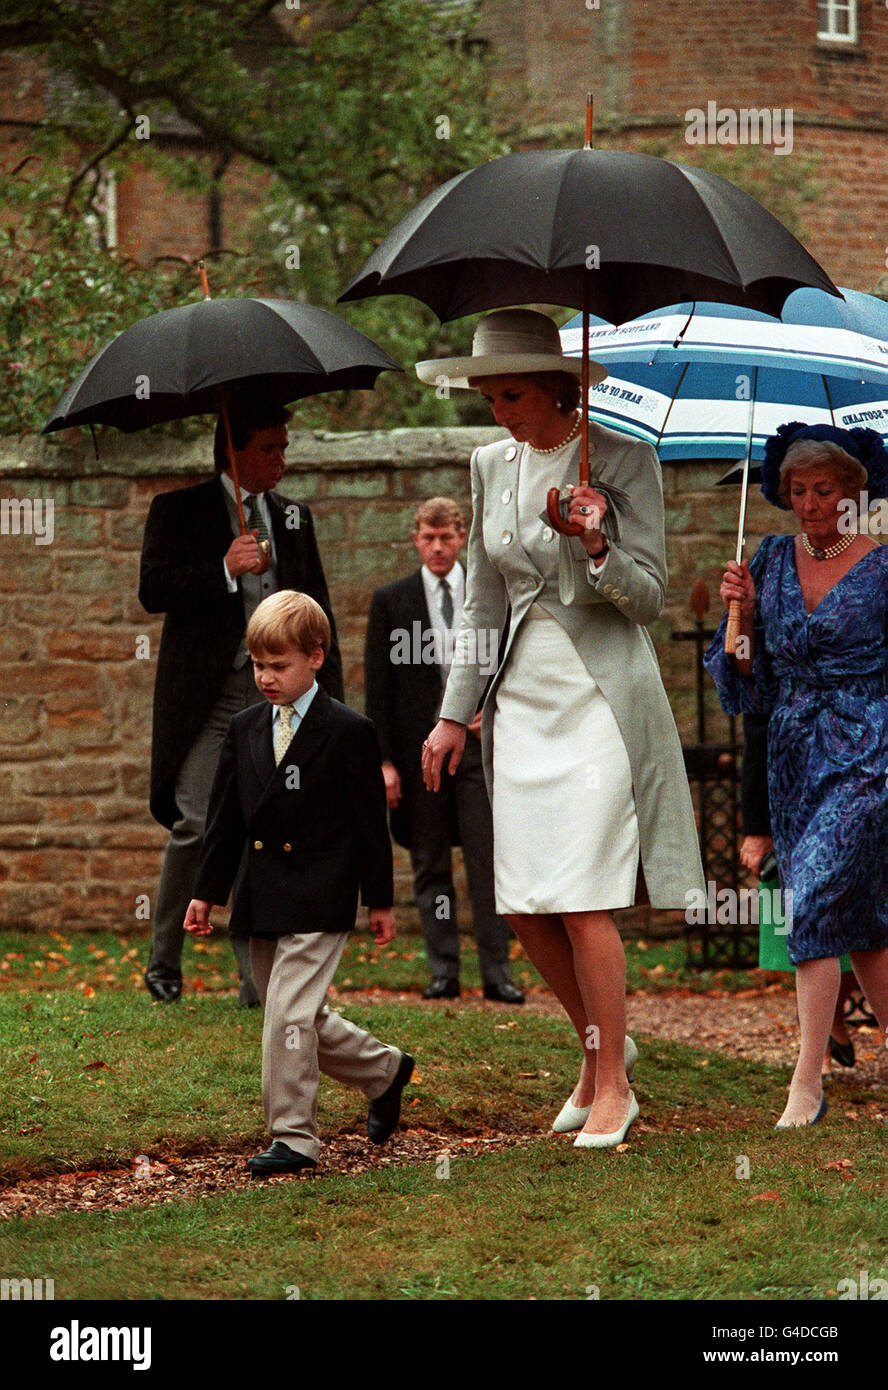 Library file date 16/9/89 of the Princess of Wales with her eldest son Prince William arriving for the wedding of her brother Viscount Althorp to Victoria Lockwood at the Virign Church in Brington, Northants. Prince William celelbrates his 16th birthday this Sunday (June 21). PA picture Stock Photo